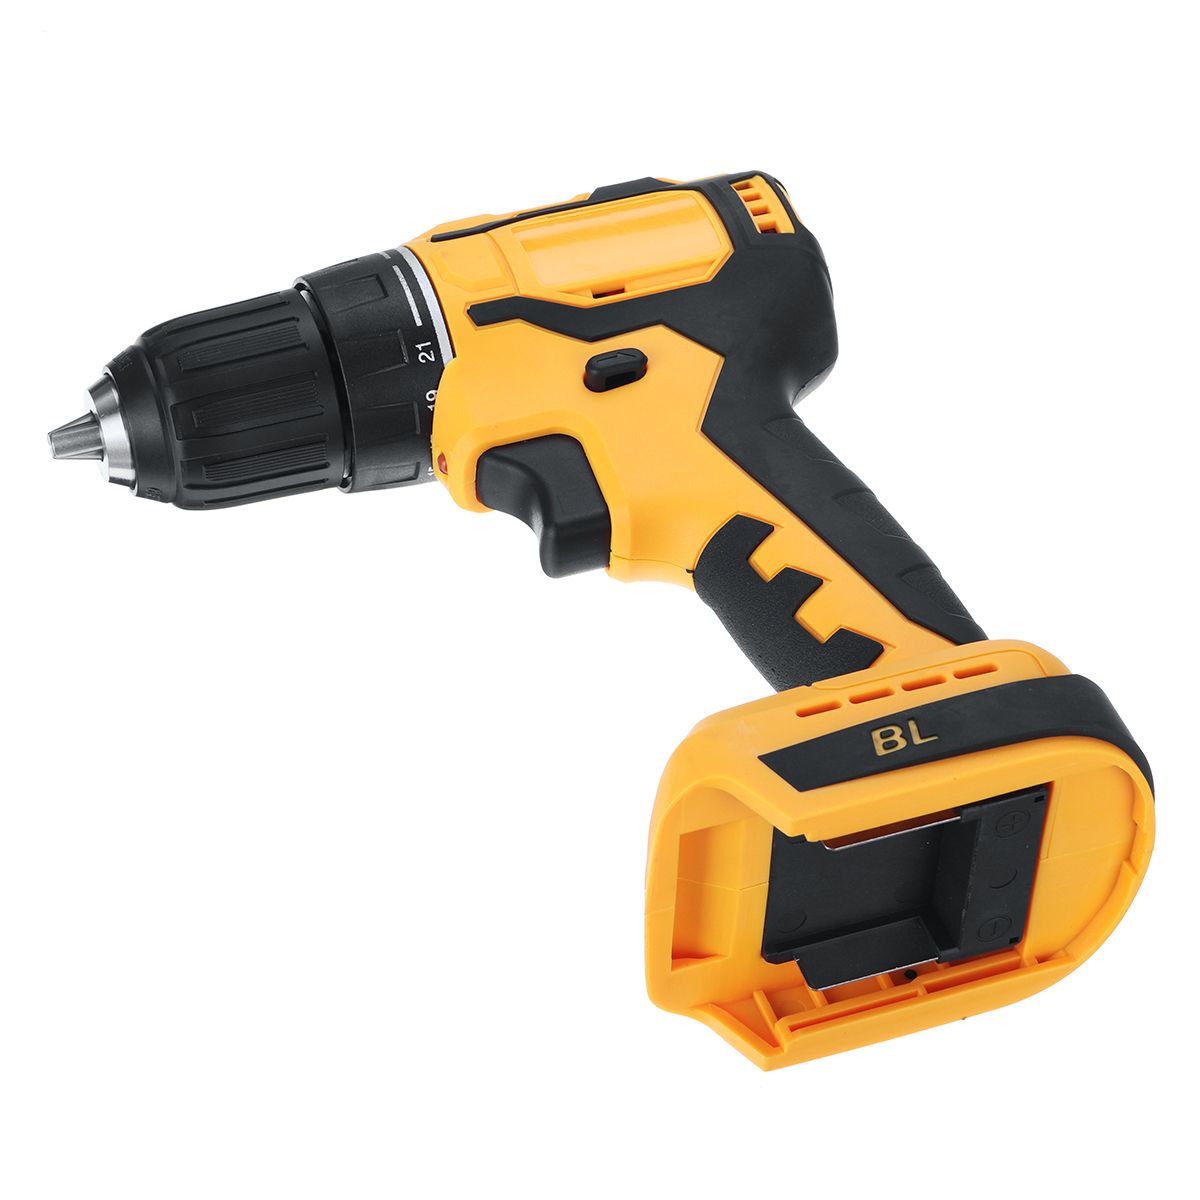 10mm-Chuck-Brushless-Impact-Drill-350Nm-Cordless-Electric-Drill-For-Makita-18V-Battery-4000RPM-LED-L-1642845